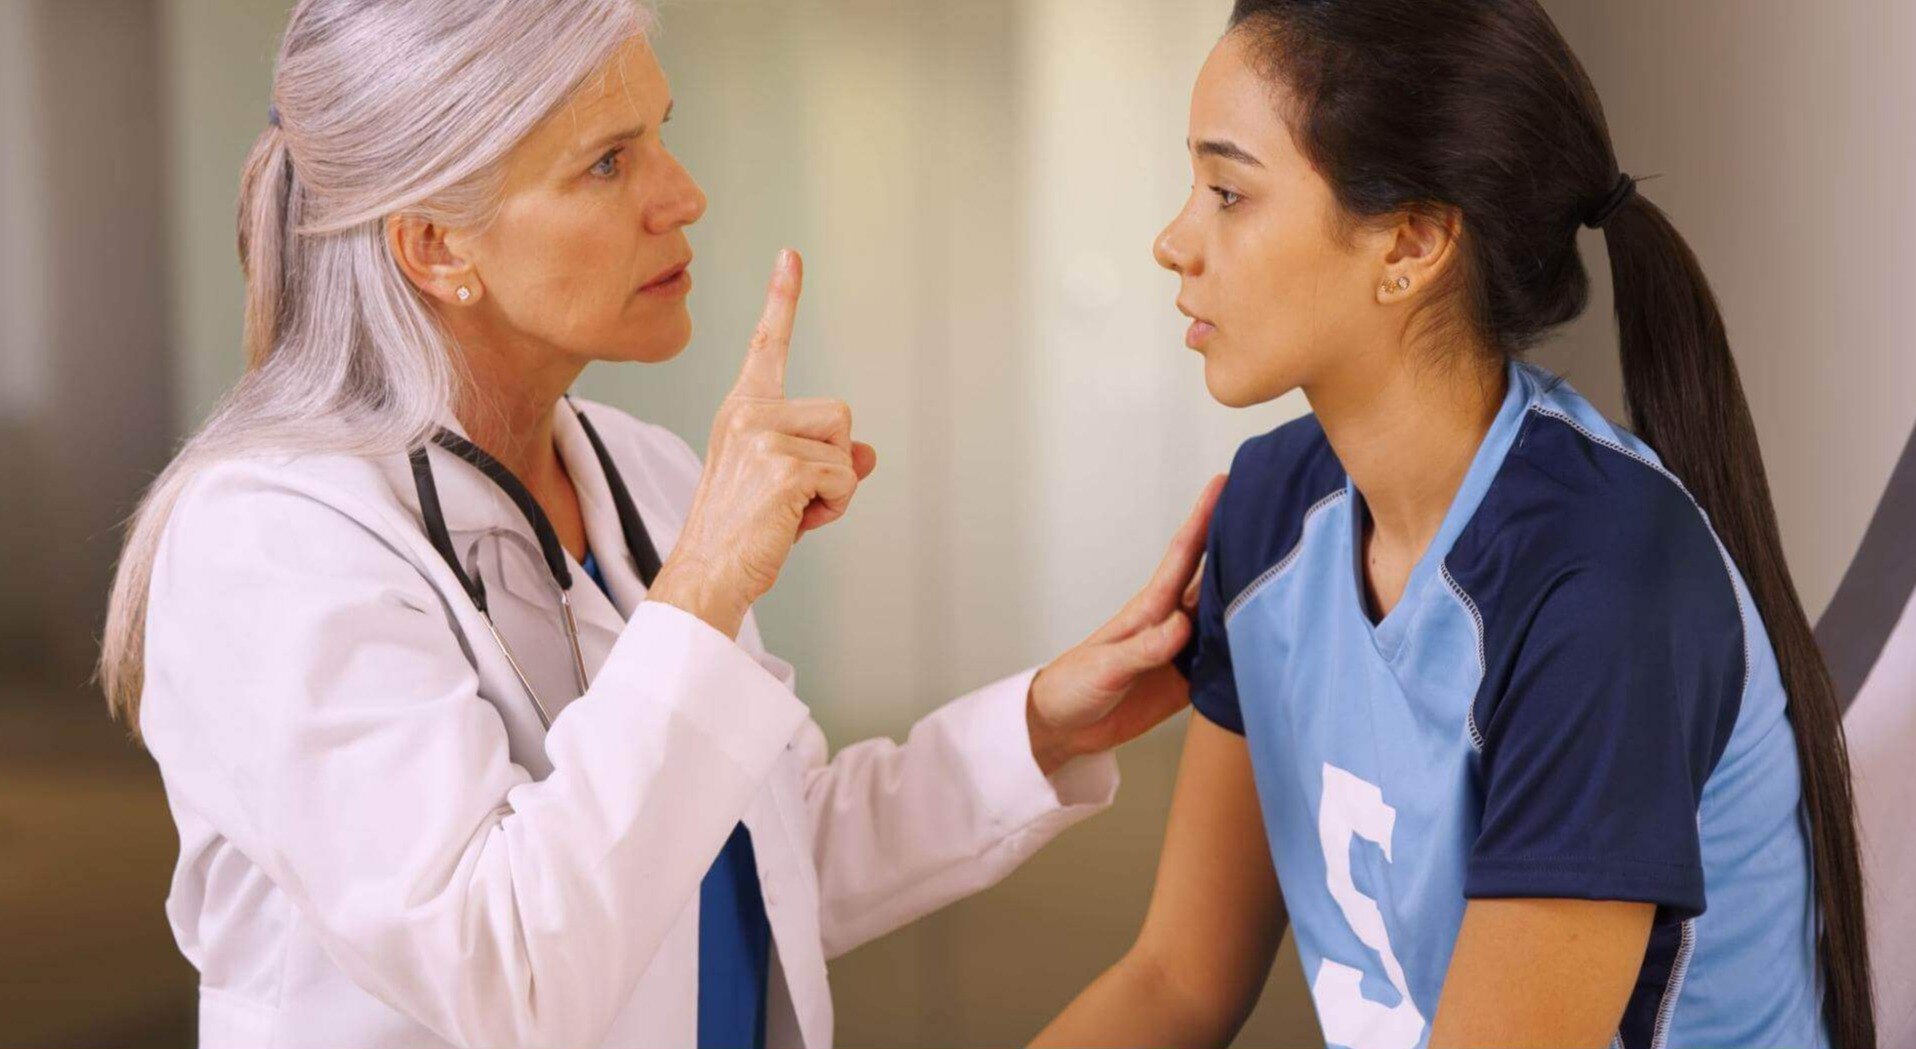 doctor evaluating athlete